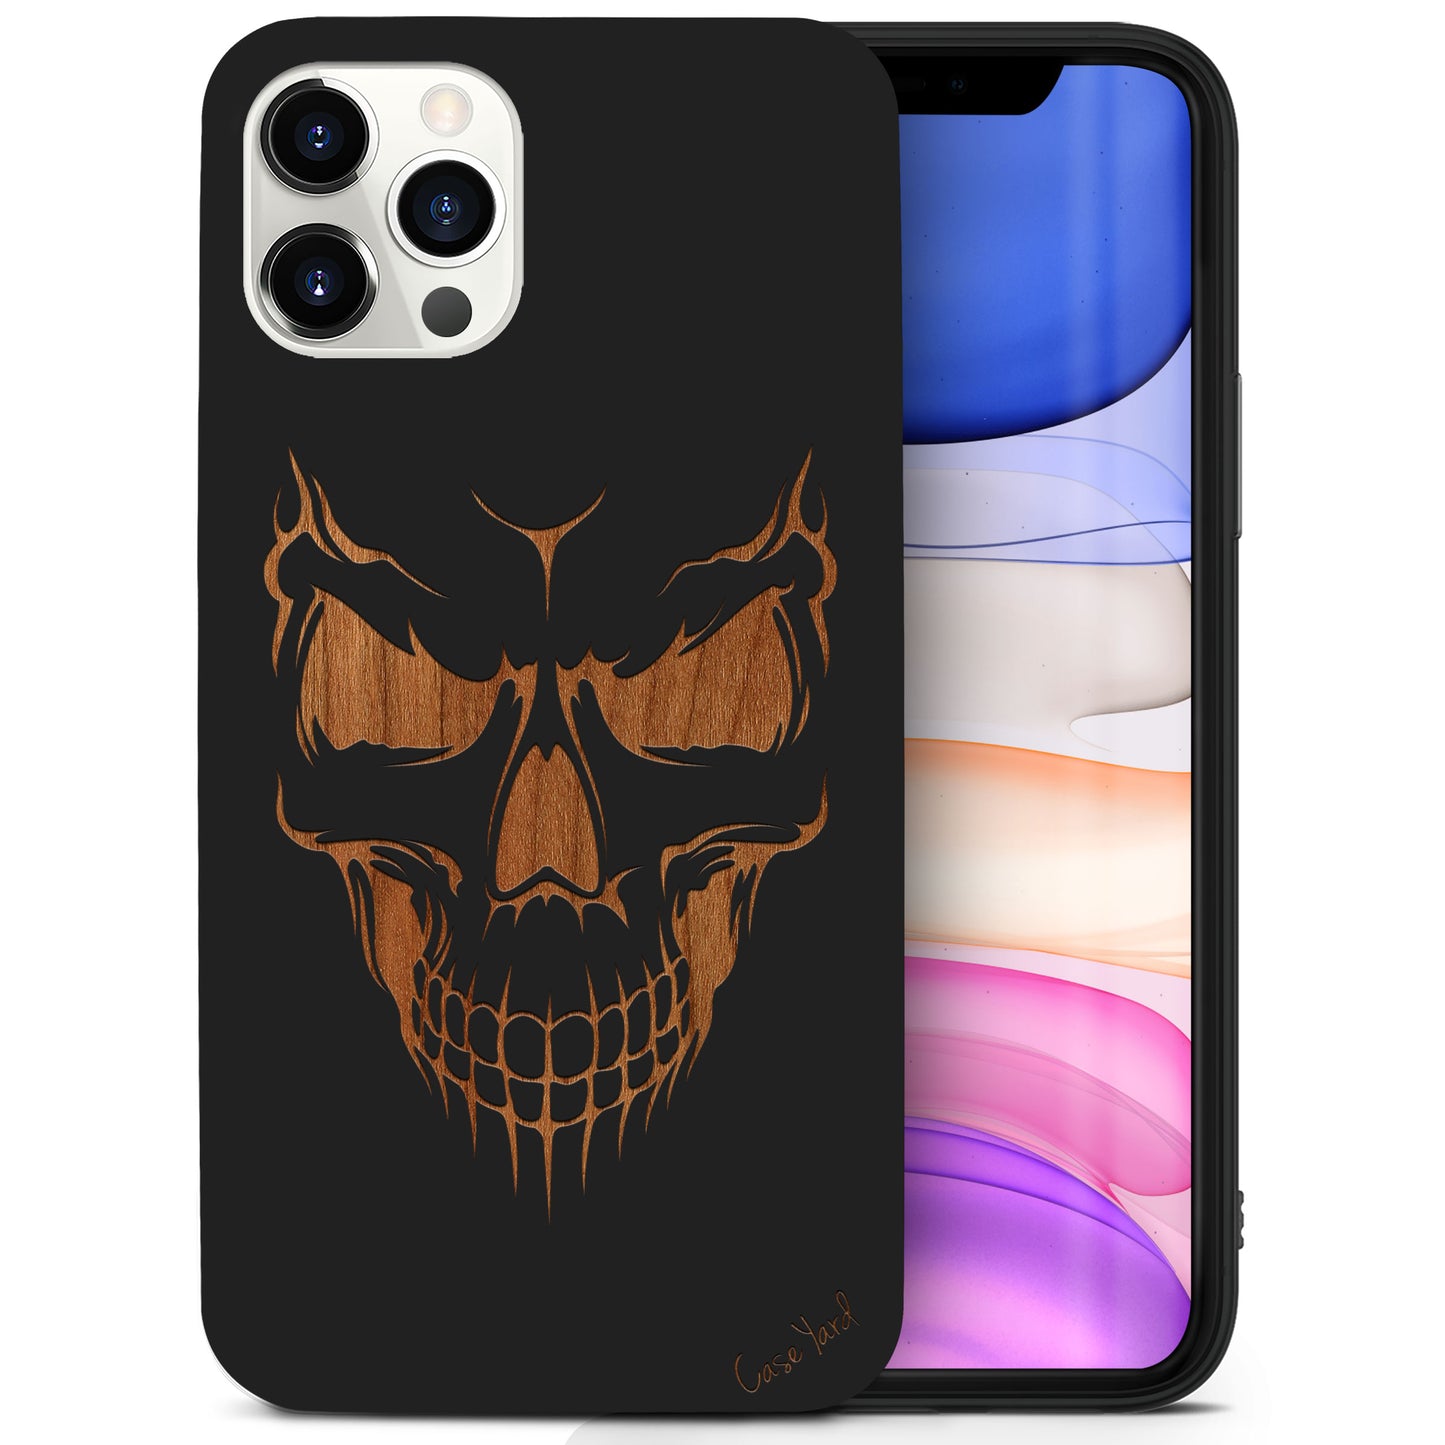 Wooden Cell Phone Case Cover, Laser Engraved case for iPhone & Samsung phone Scary Skull Design